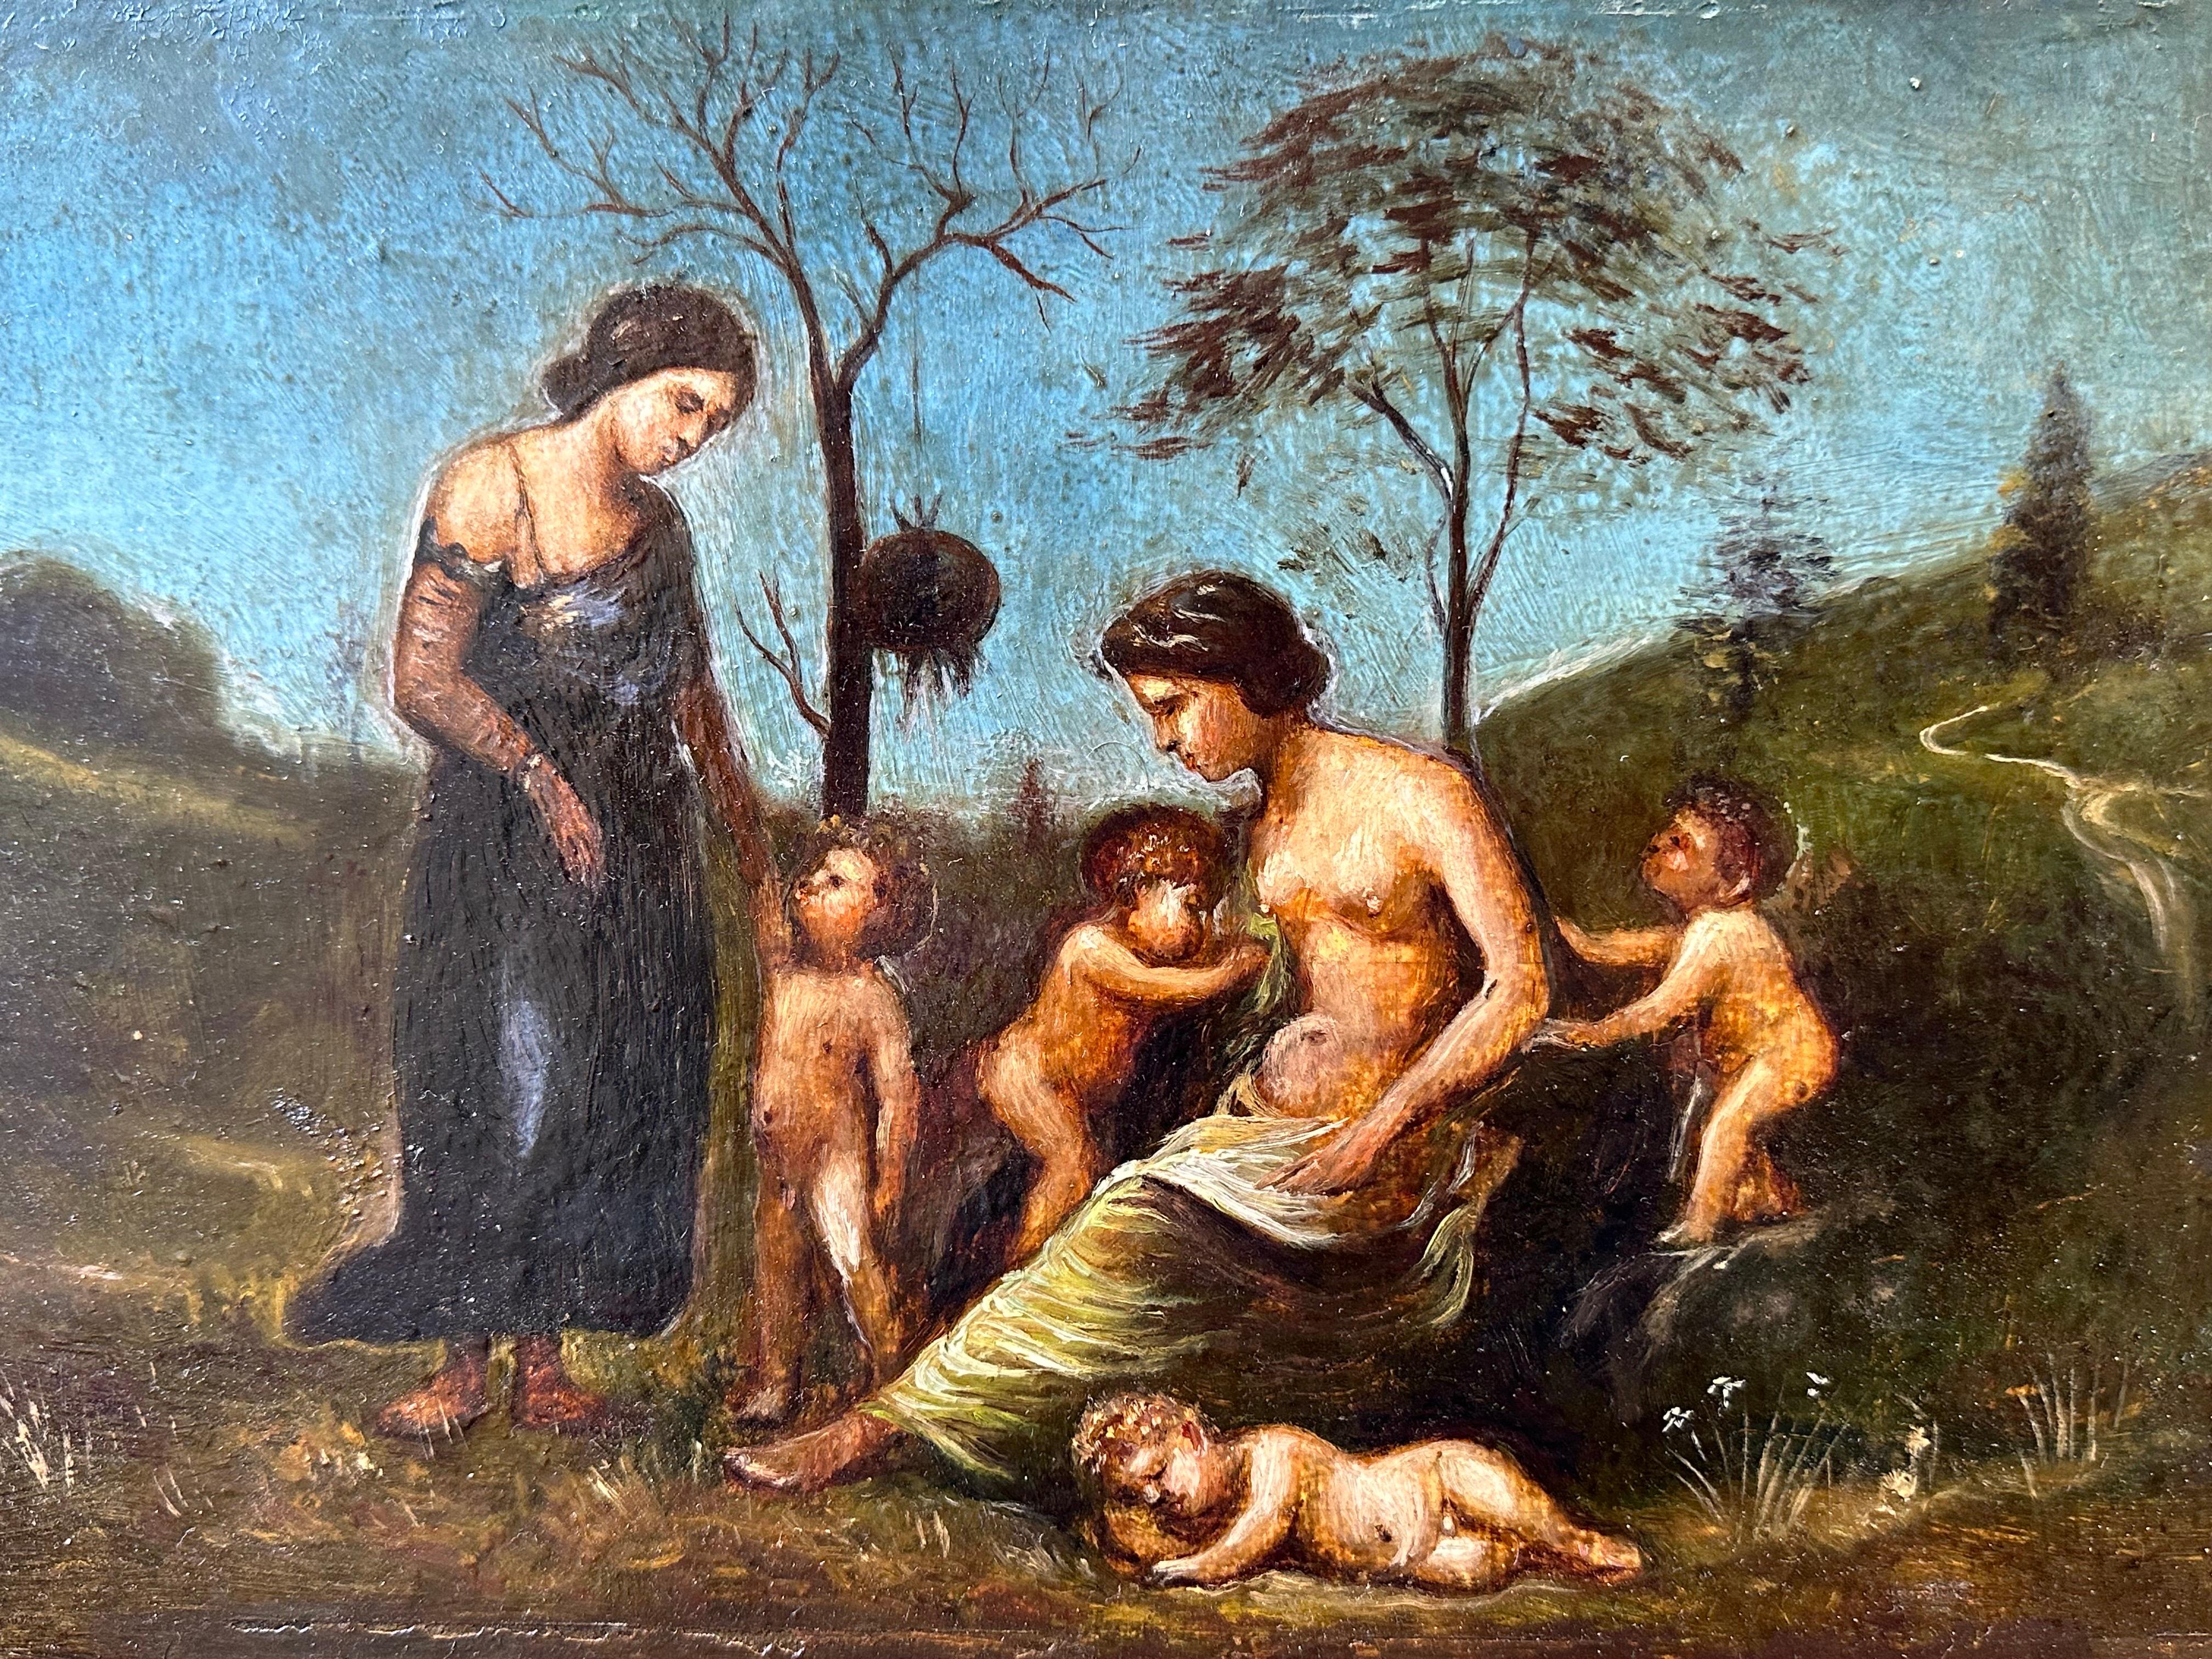 Italian 18th Century Figurative Painting - Very Fine 18th Century Italian Oil Painting Nude Figures in Classical Landscape